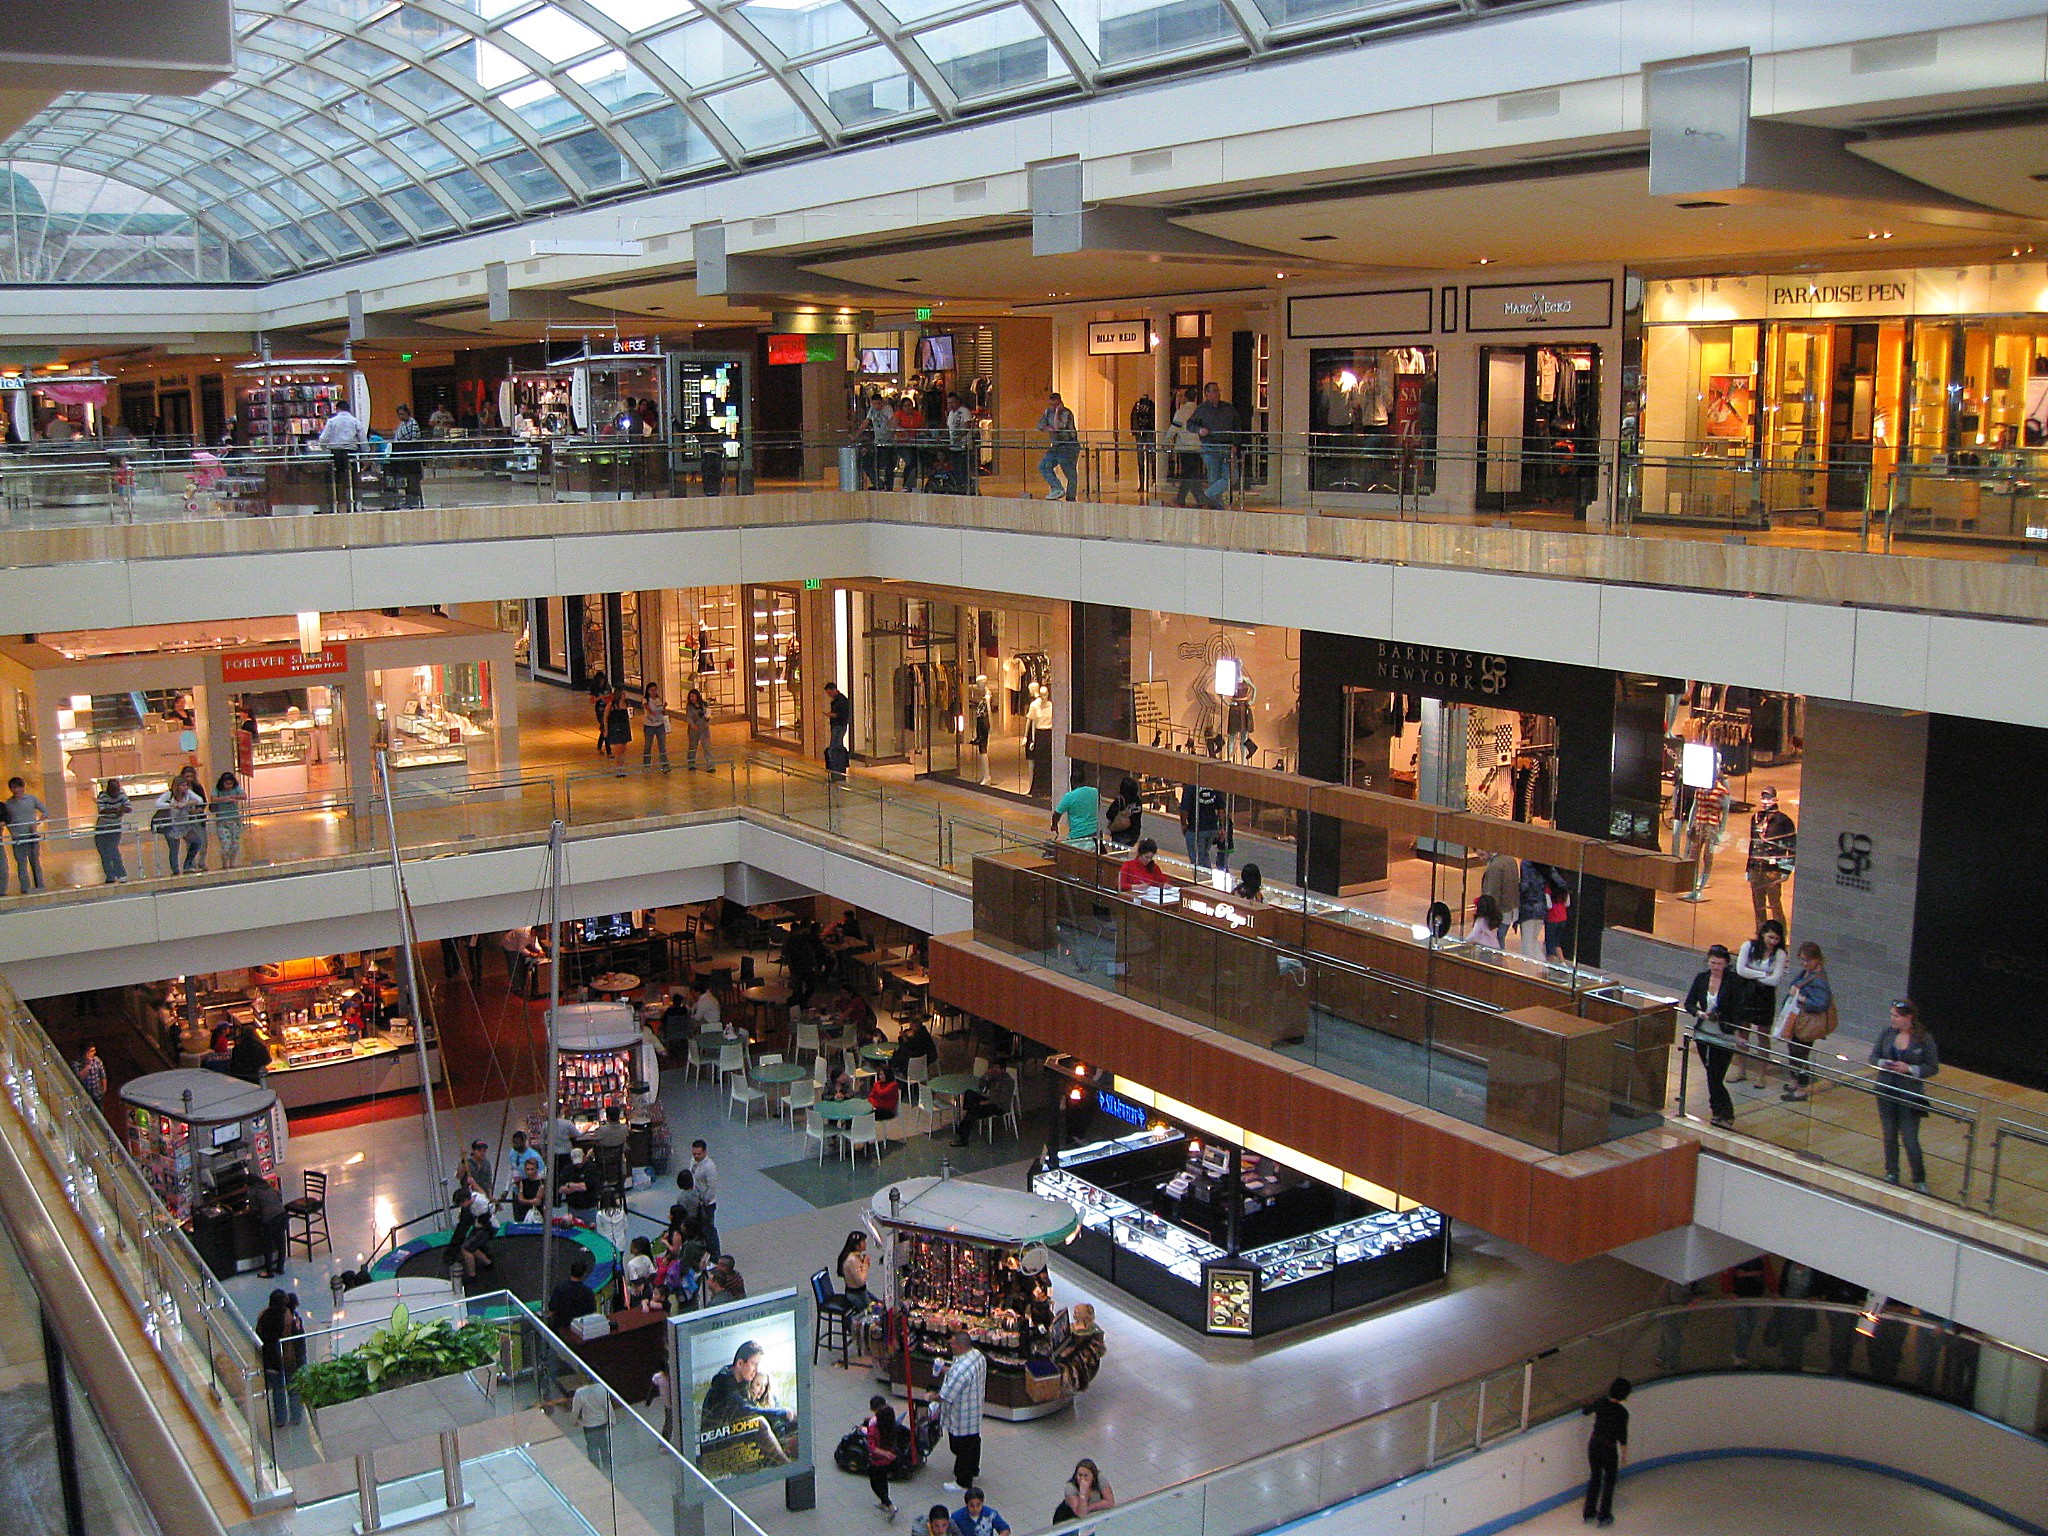 Hang out in The Galleria Mall